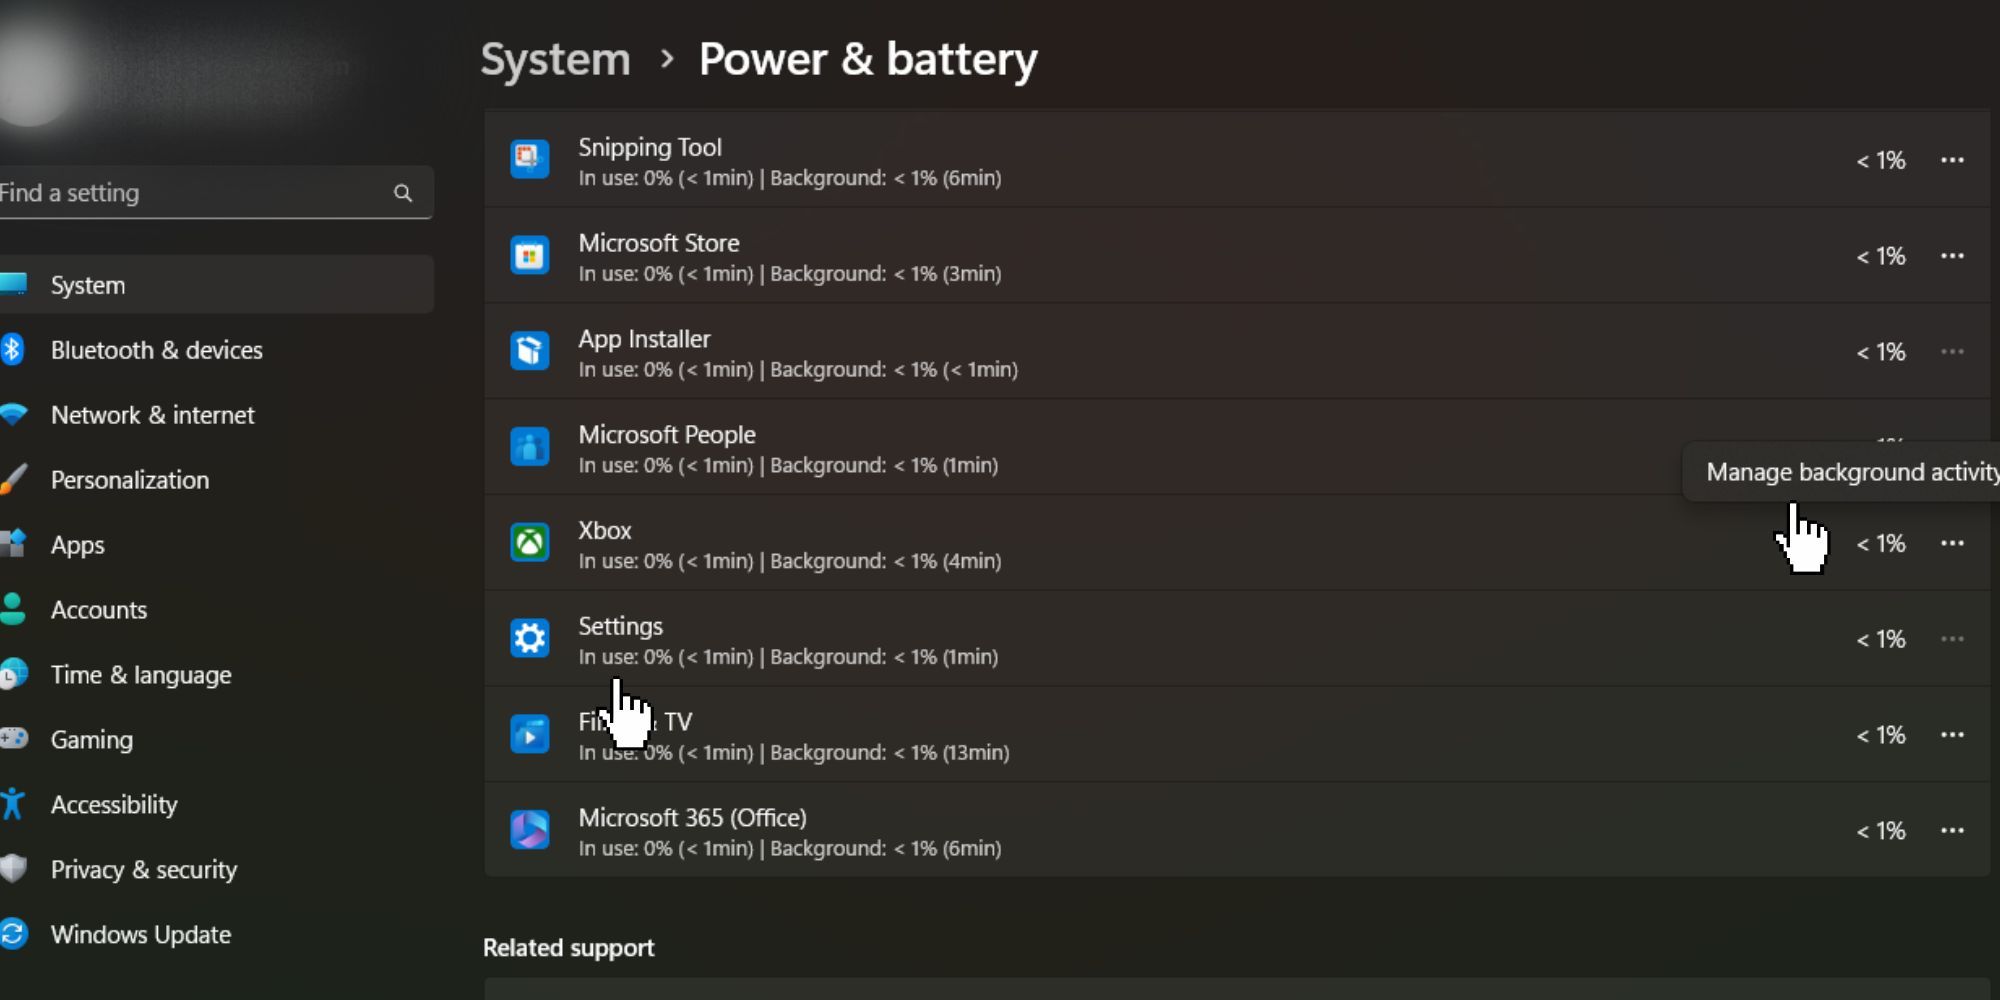 Windows PC how to disable applications via Power & Battery menu